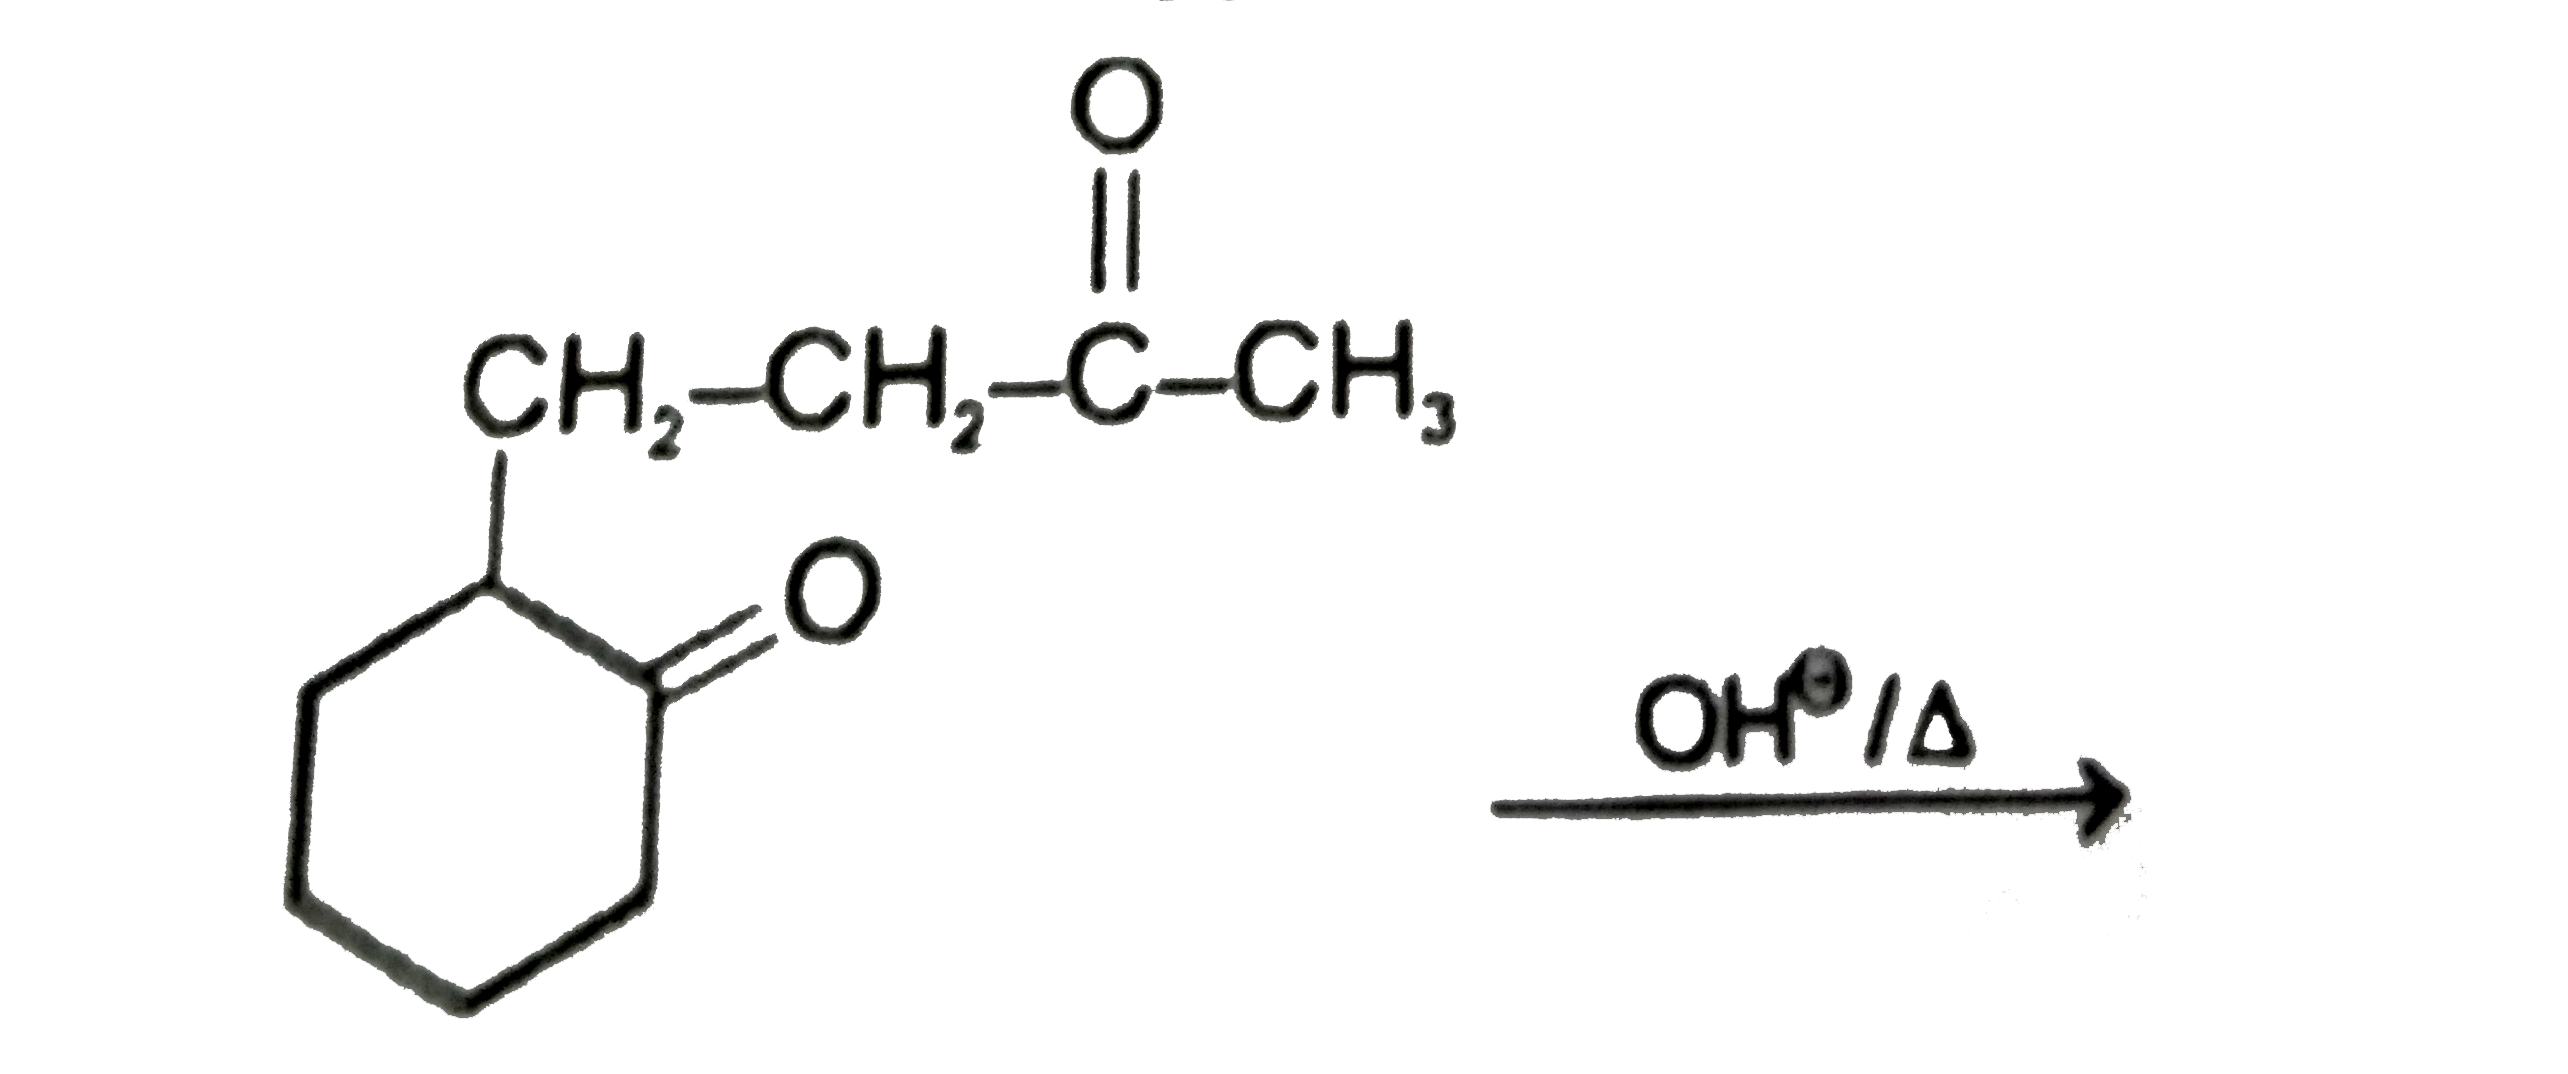 Predict the product for each of the following reactions